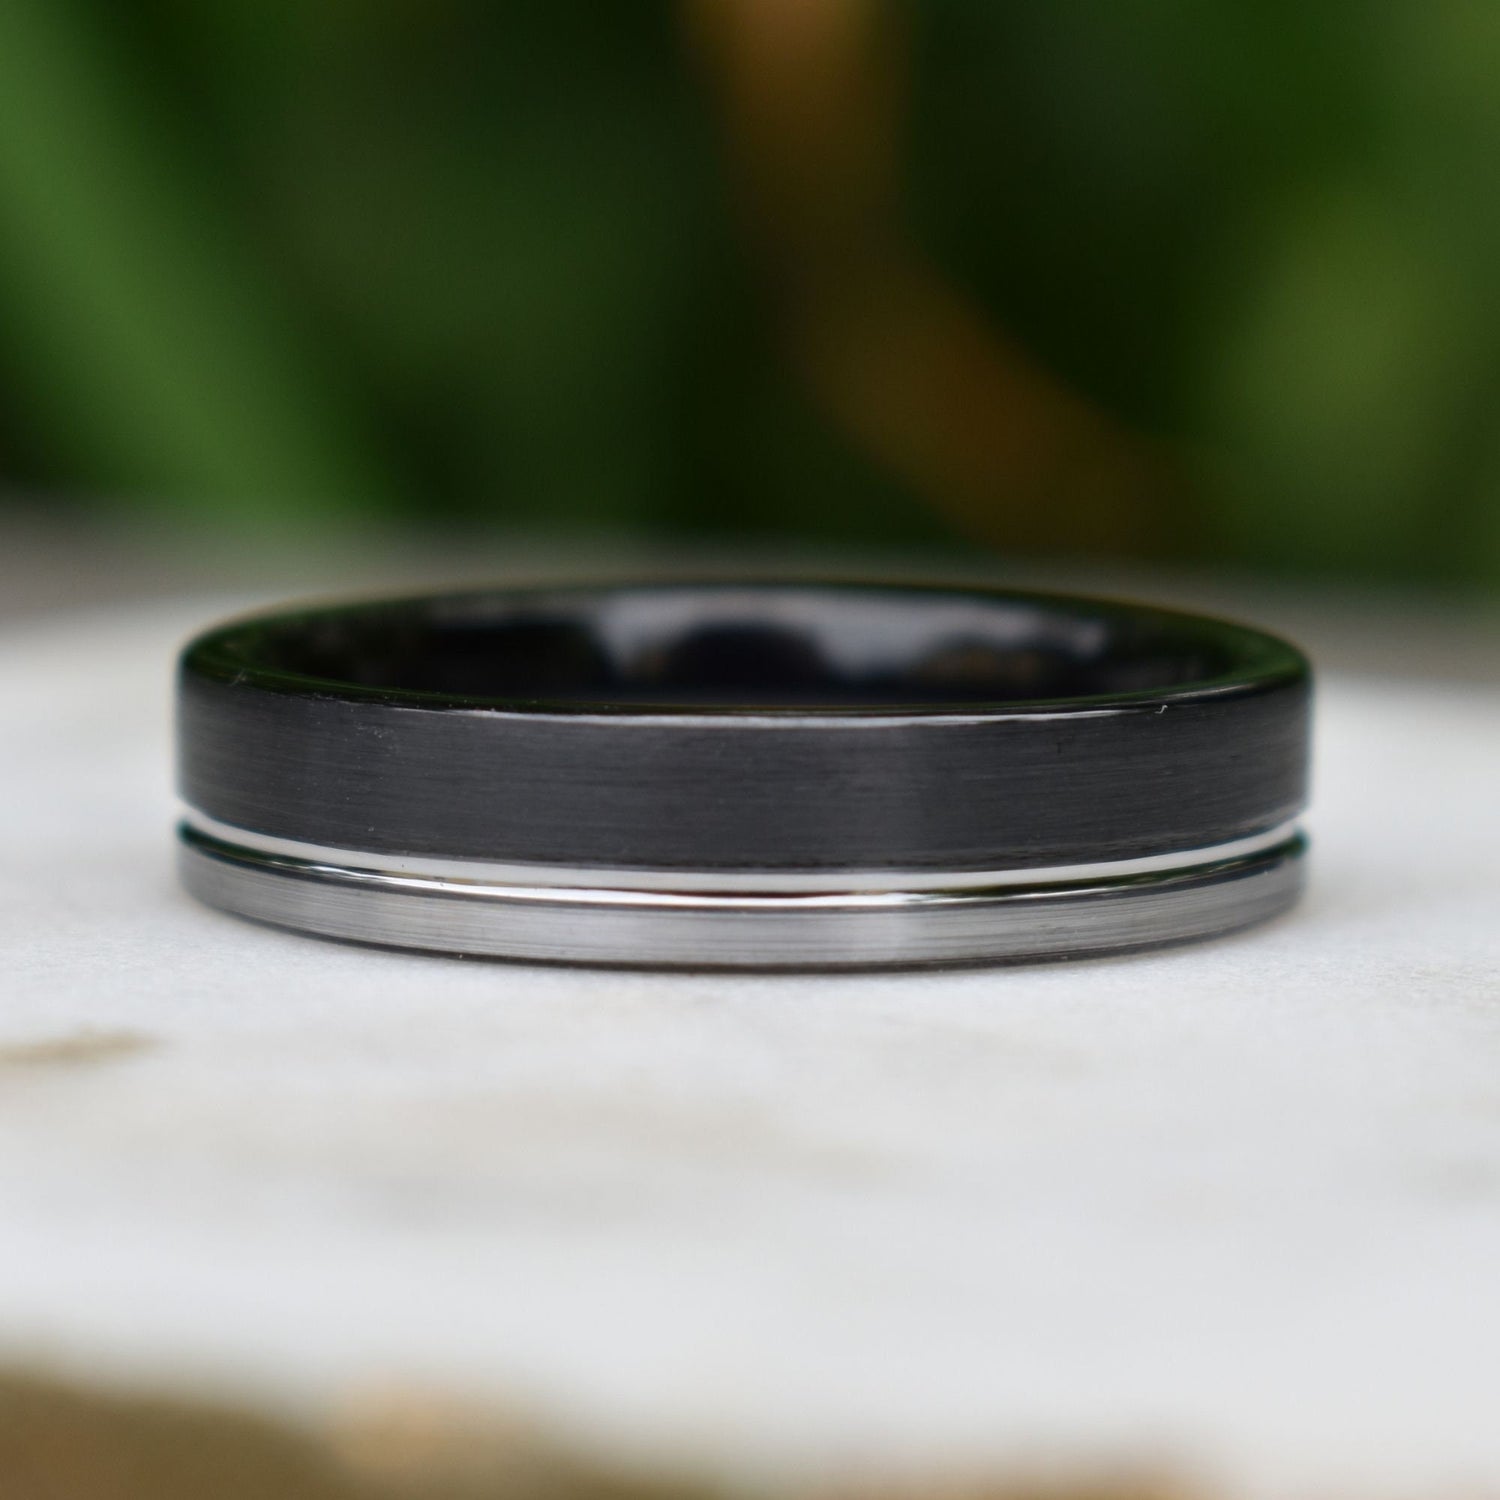 Tungsten Ring 6mm Black and Silver Brushed with Polished Silver Accent, Mens Ring, Mens Wedding Band